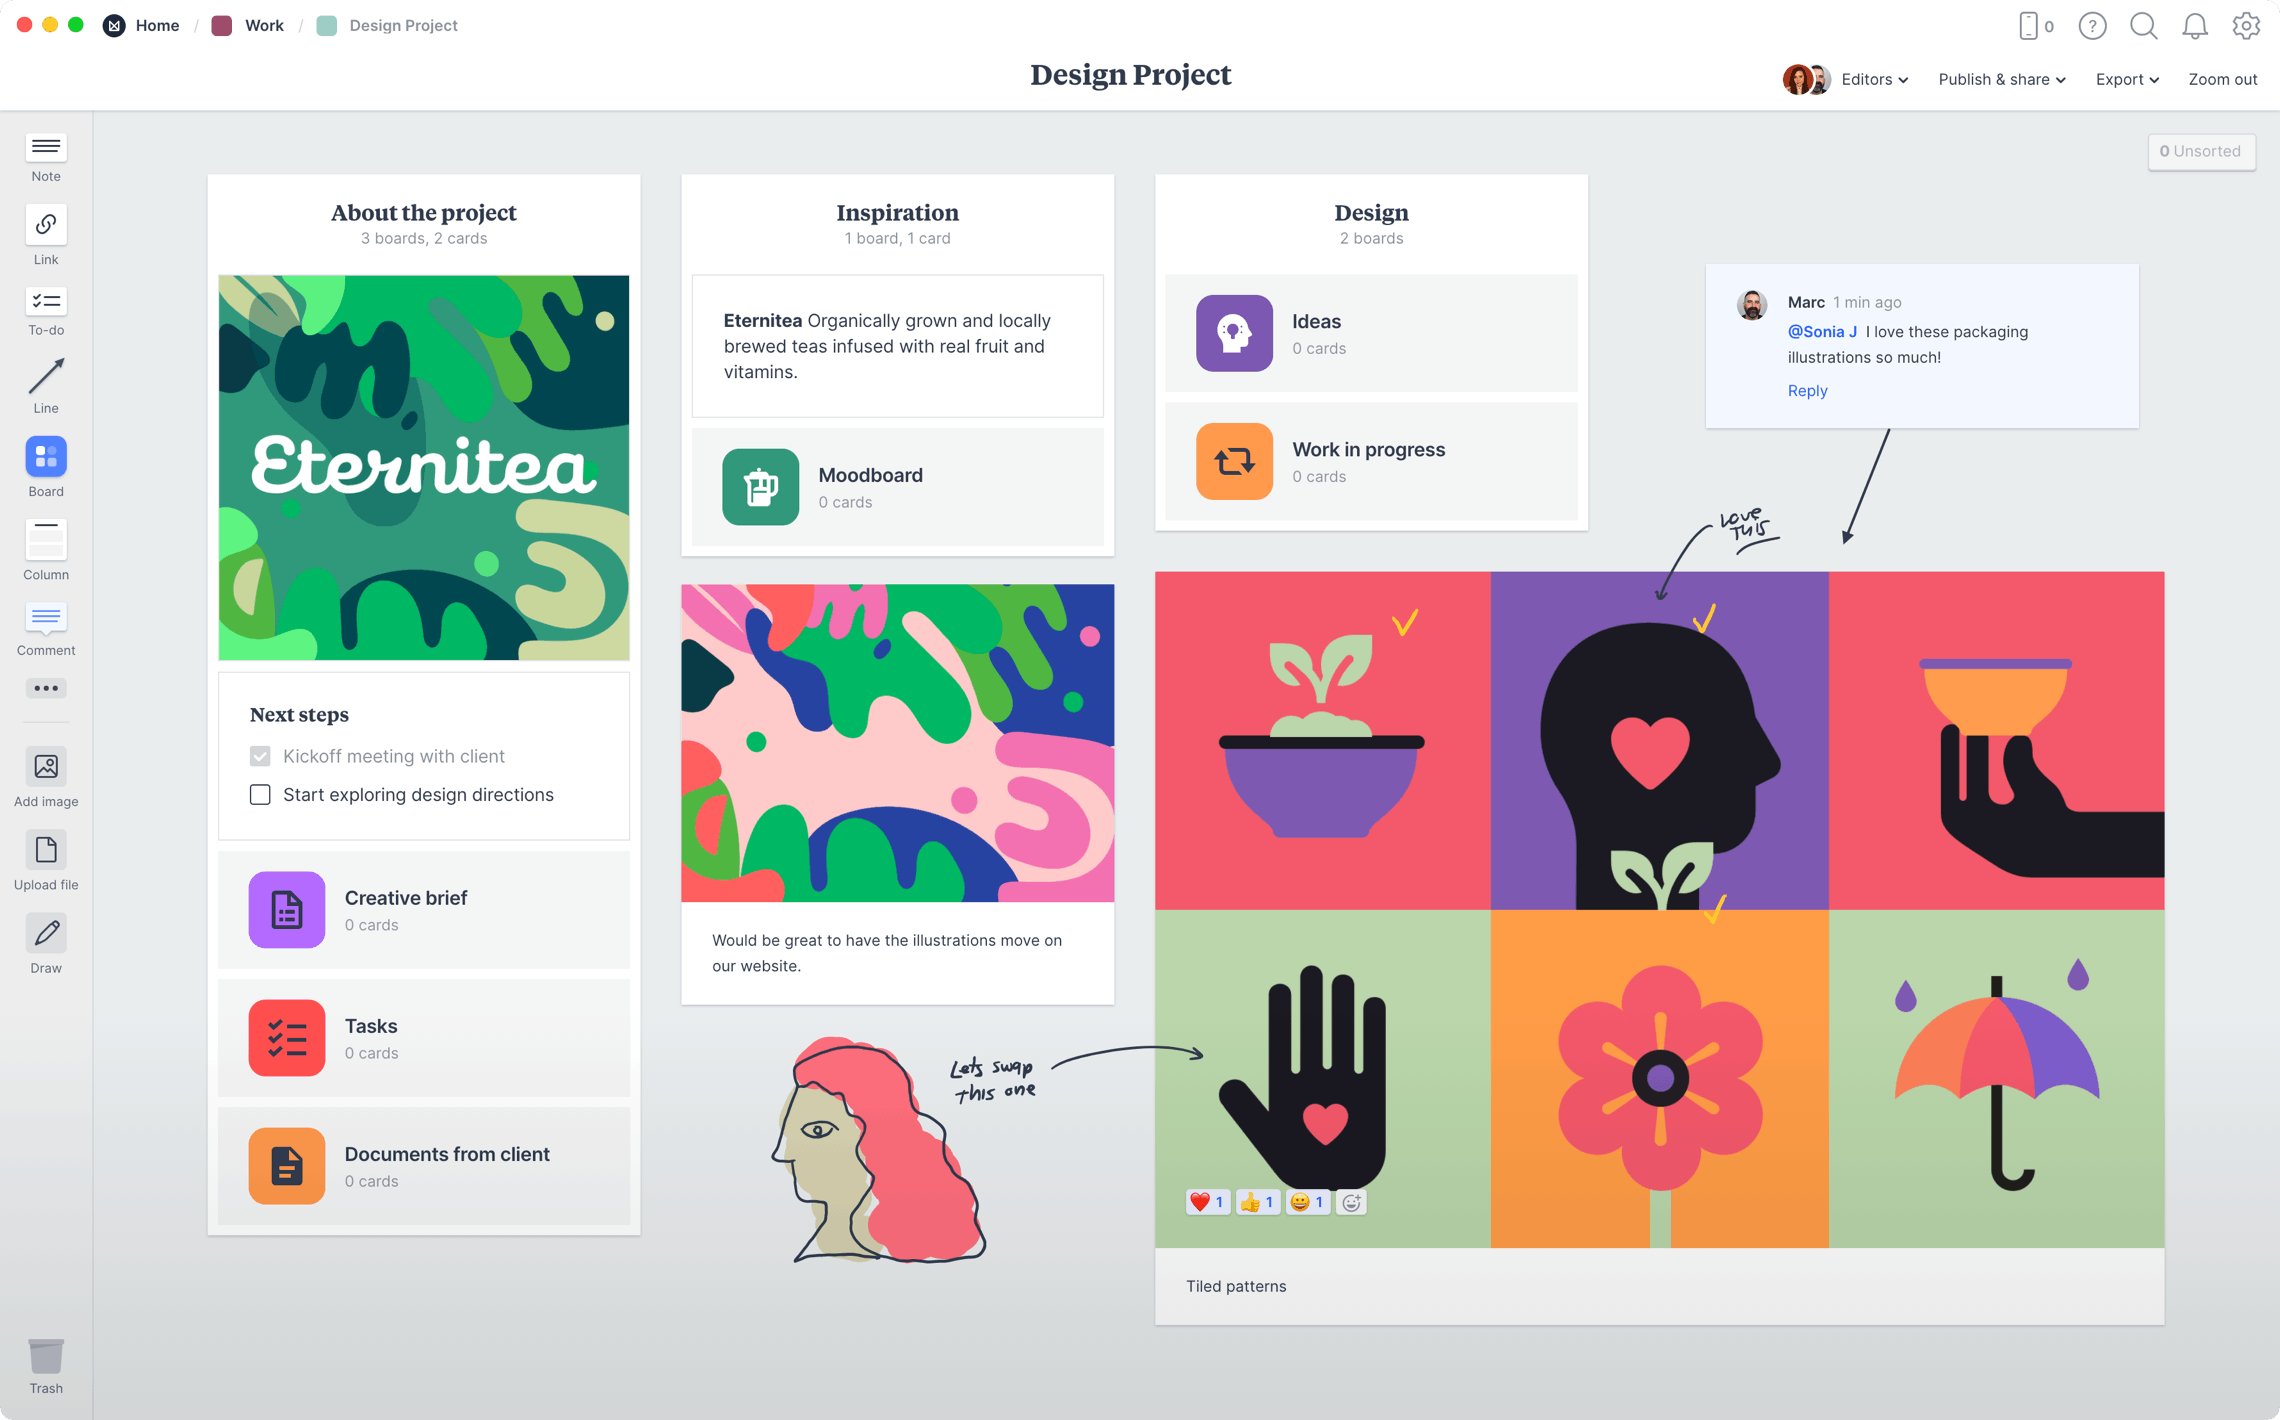 Milanote - The Tool For Organizing Creative Projects